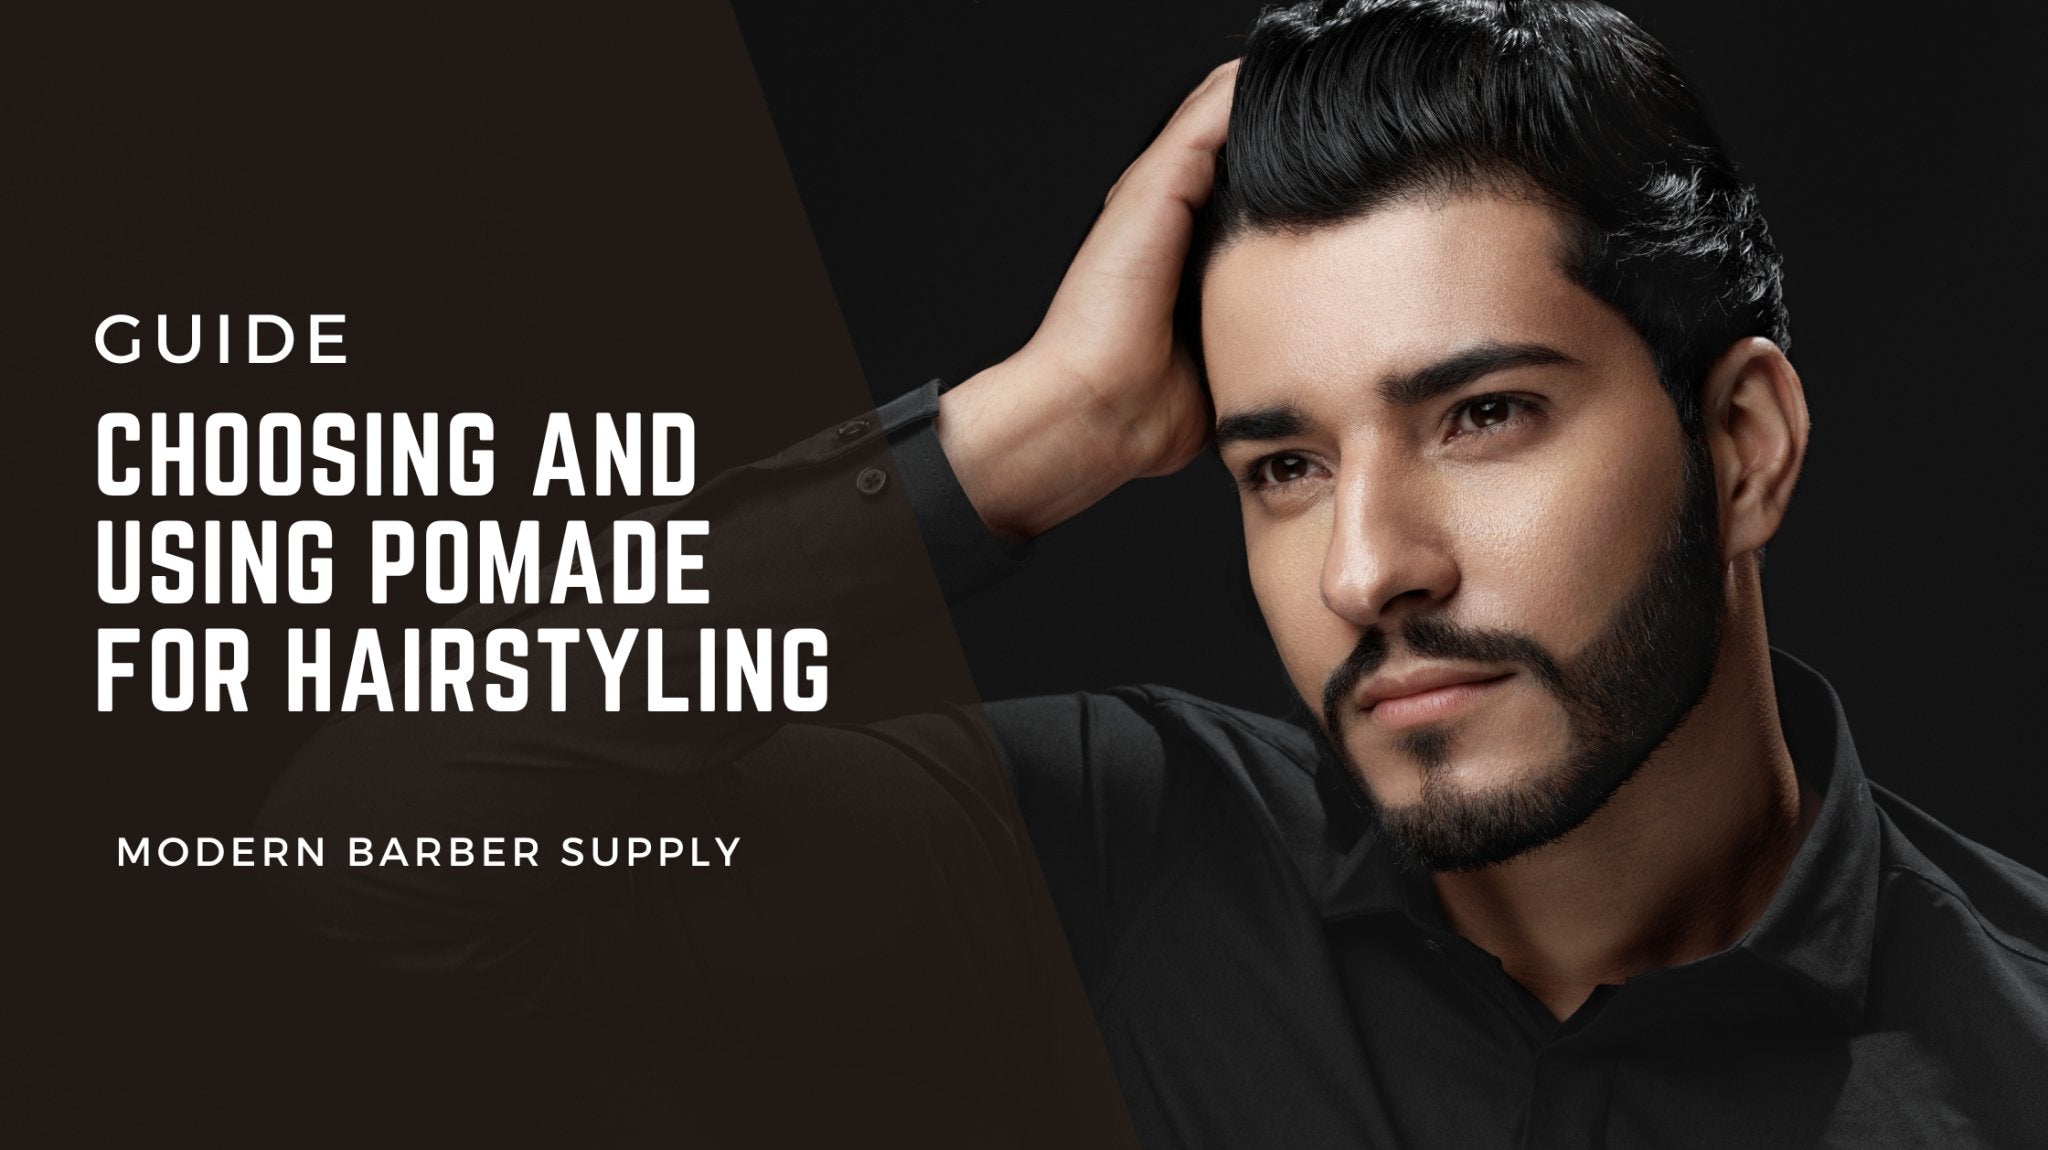 Guide to Choosing and Using Pomade for Hairstyling - Modern Barber Supply